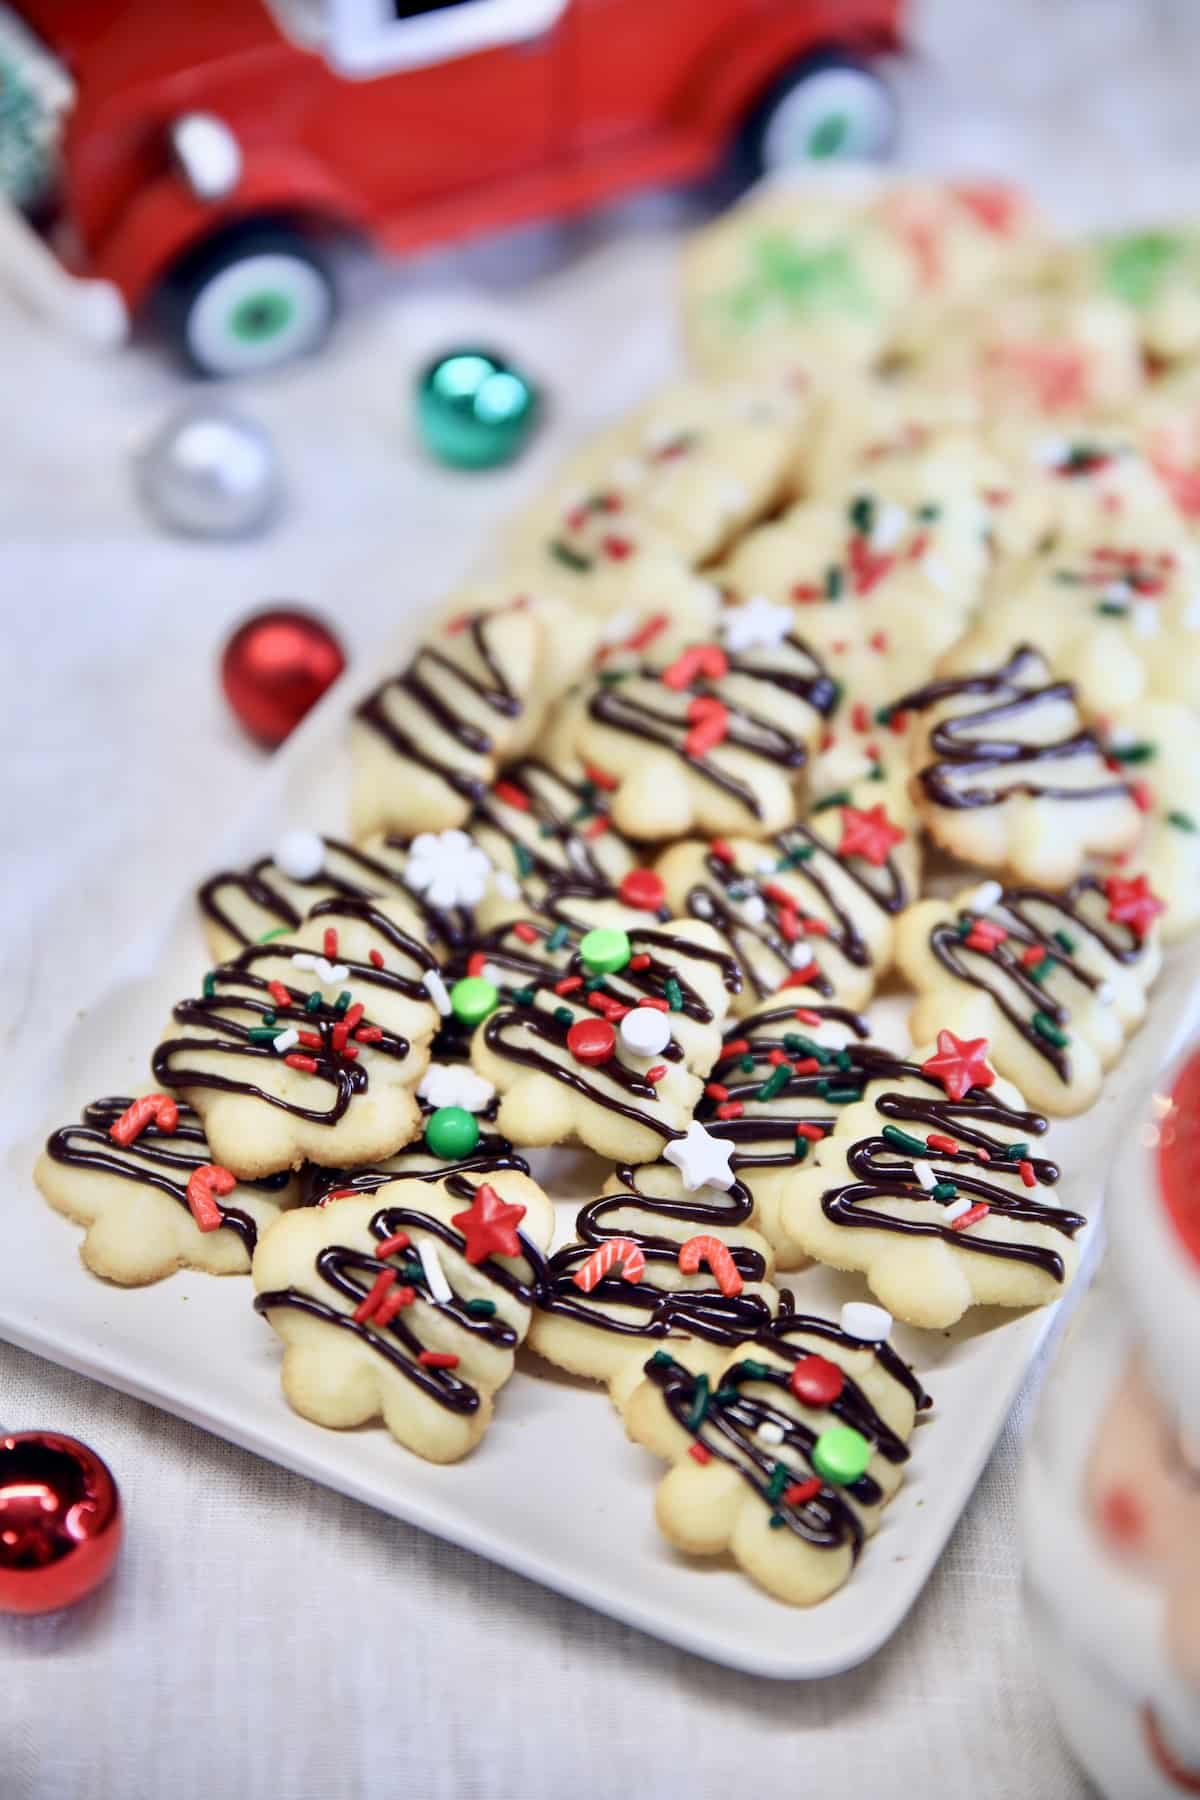 Tray of Christmas cookies.